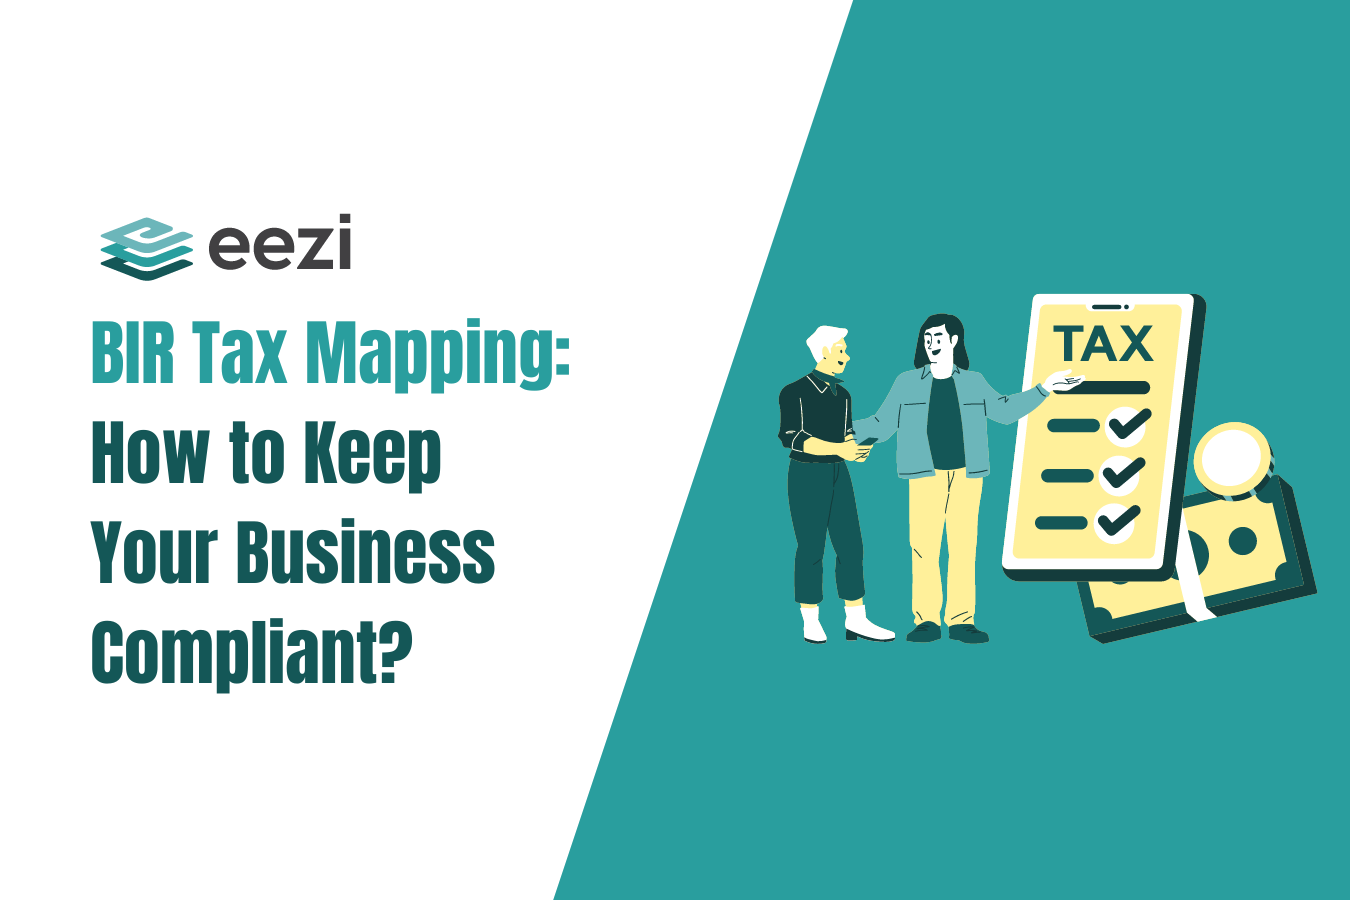 BIR Tax Mapping: How to Keep Your Business Compliant?